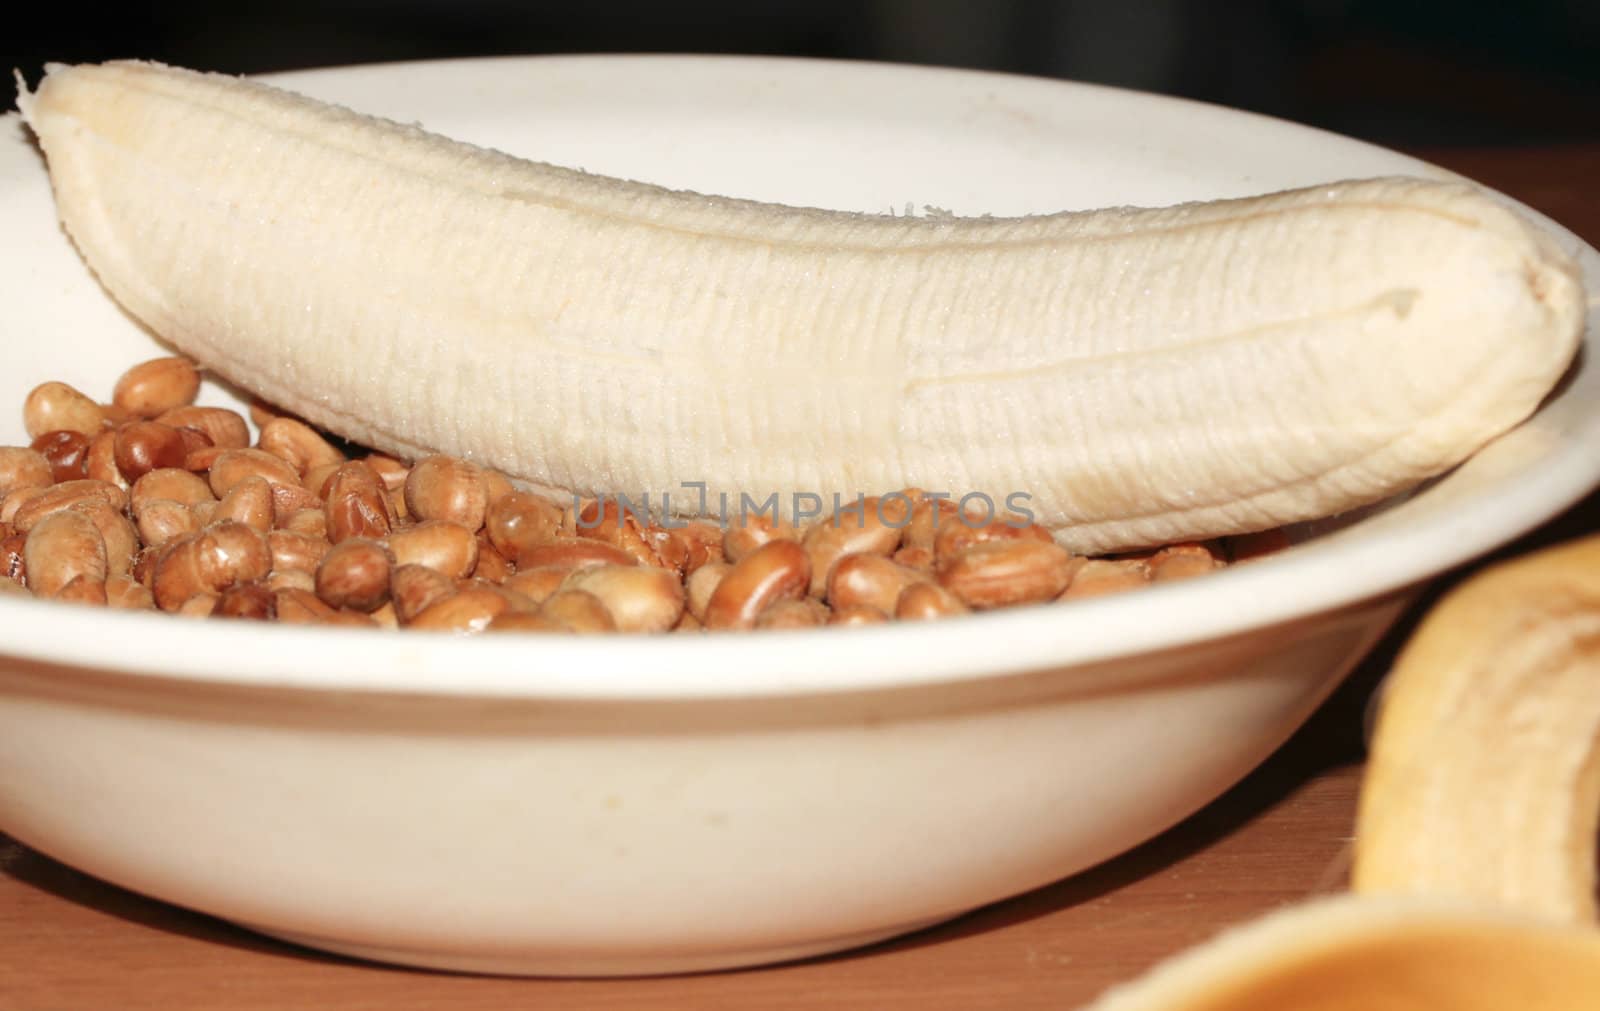 Peeled Banana and Soybeans by tornado98